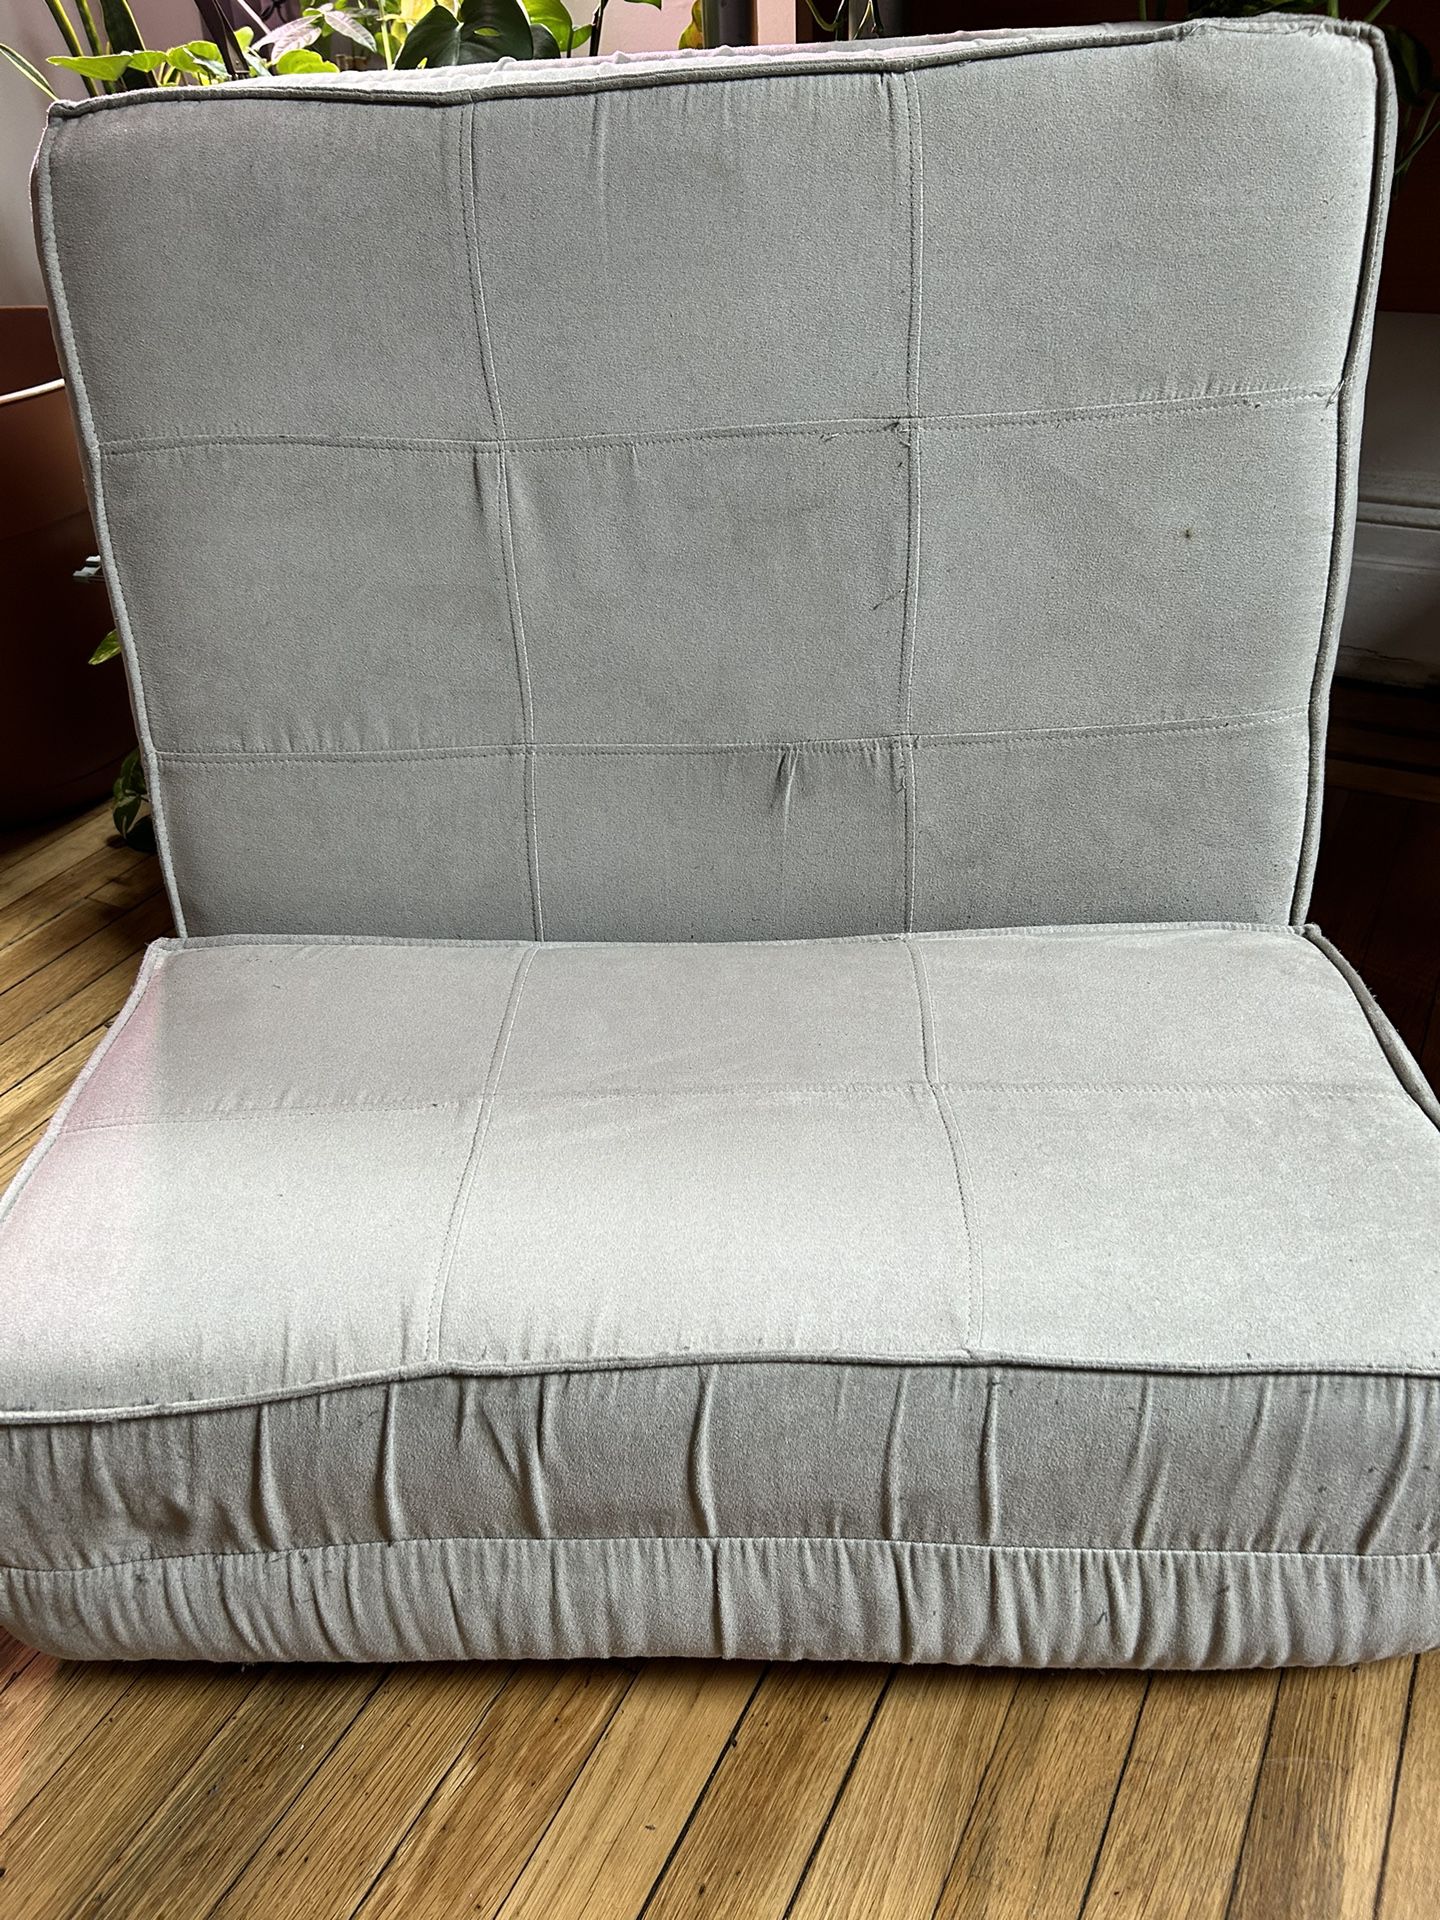 CONVERTIBLE CHAIR FOR SALE